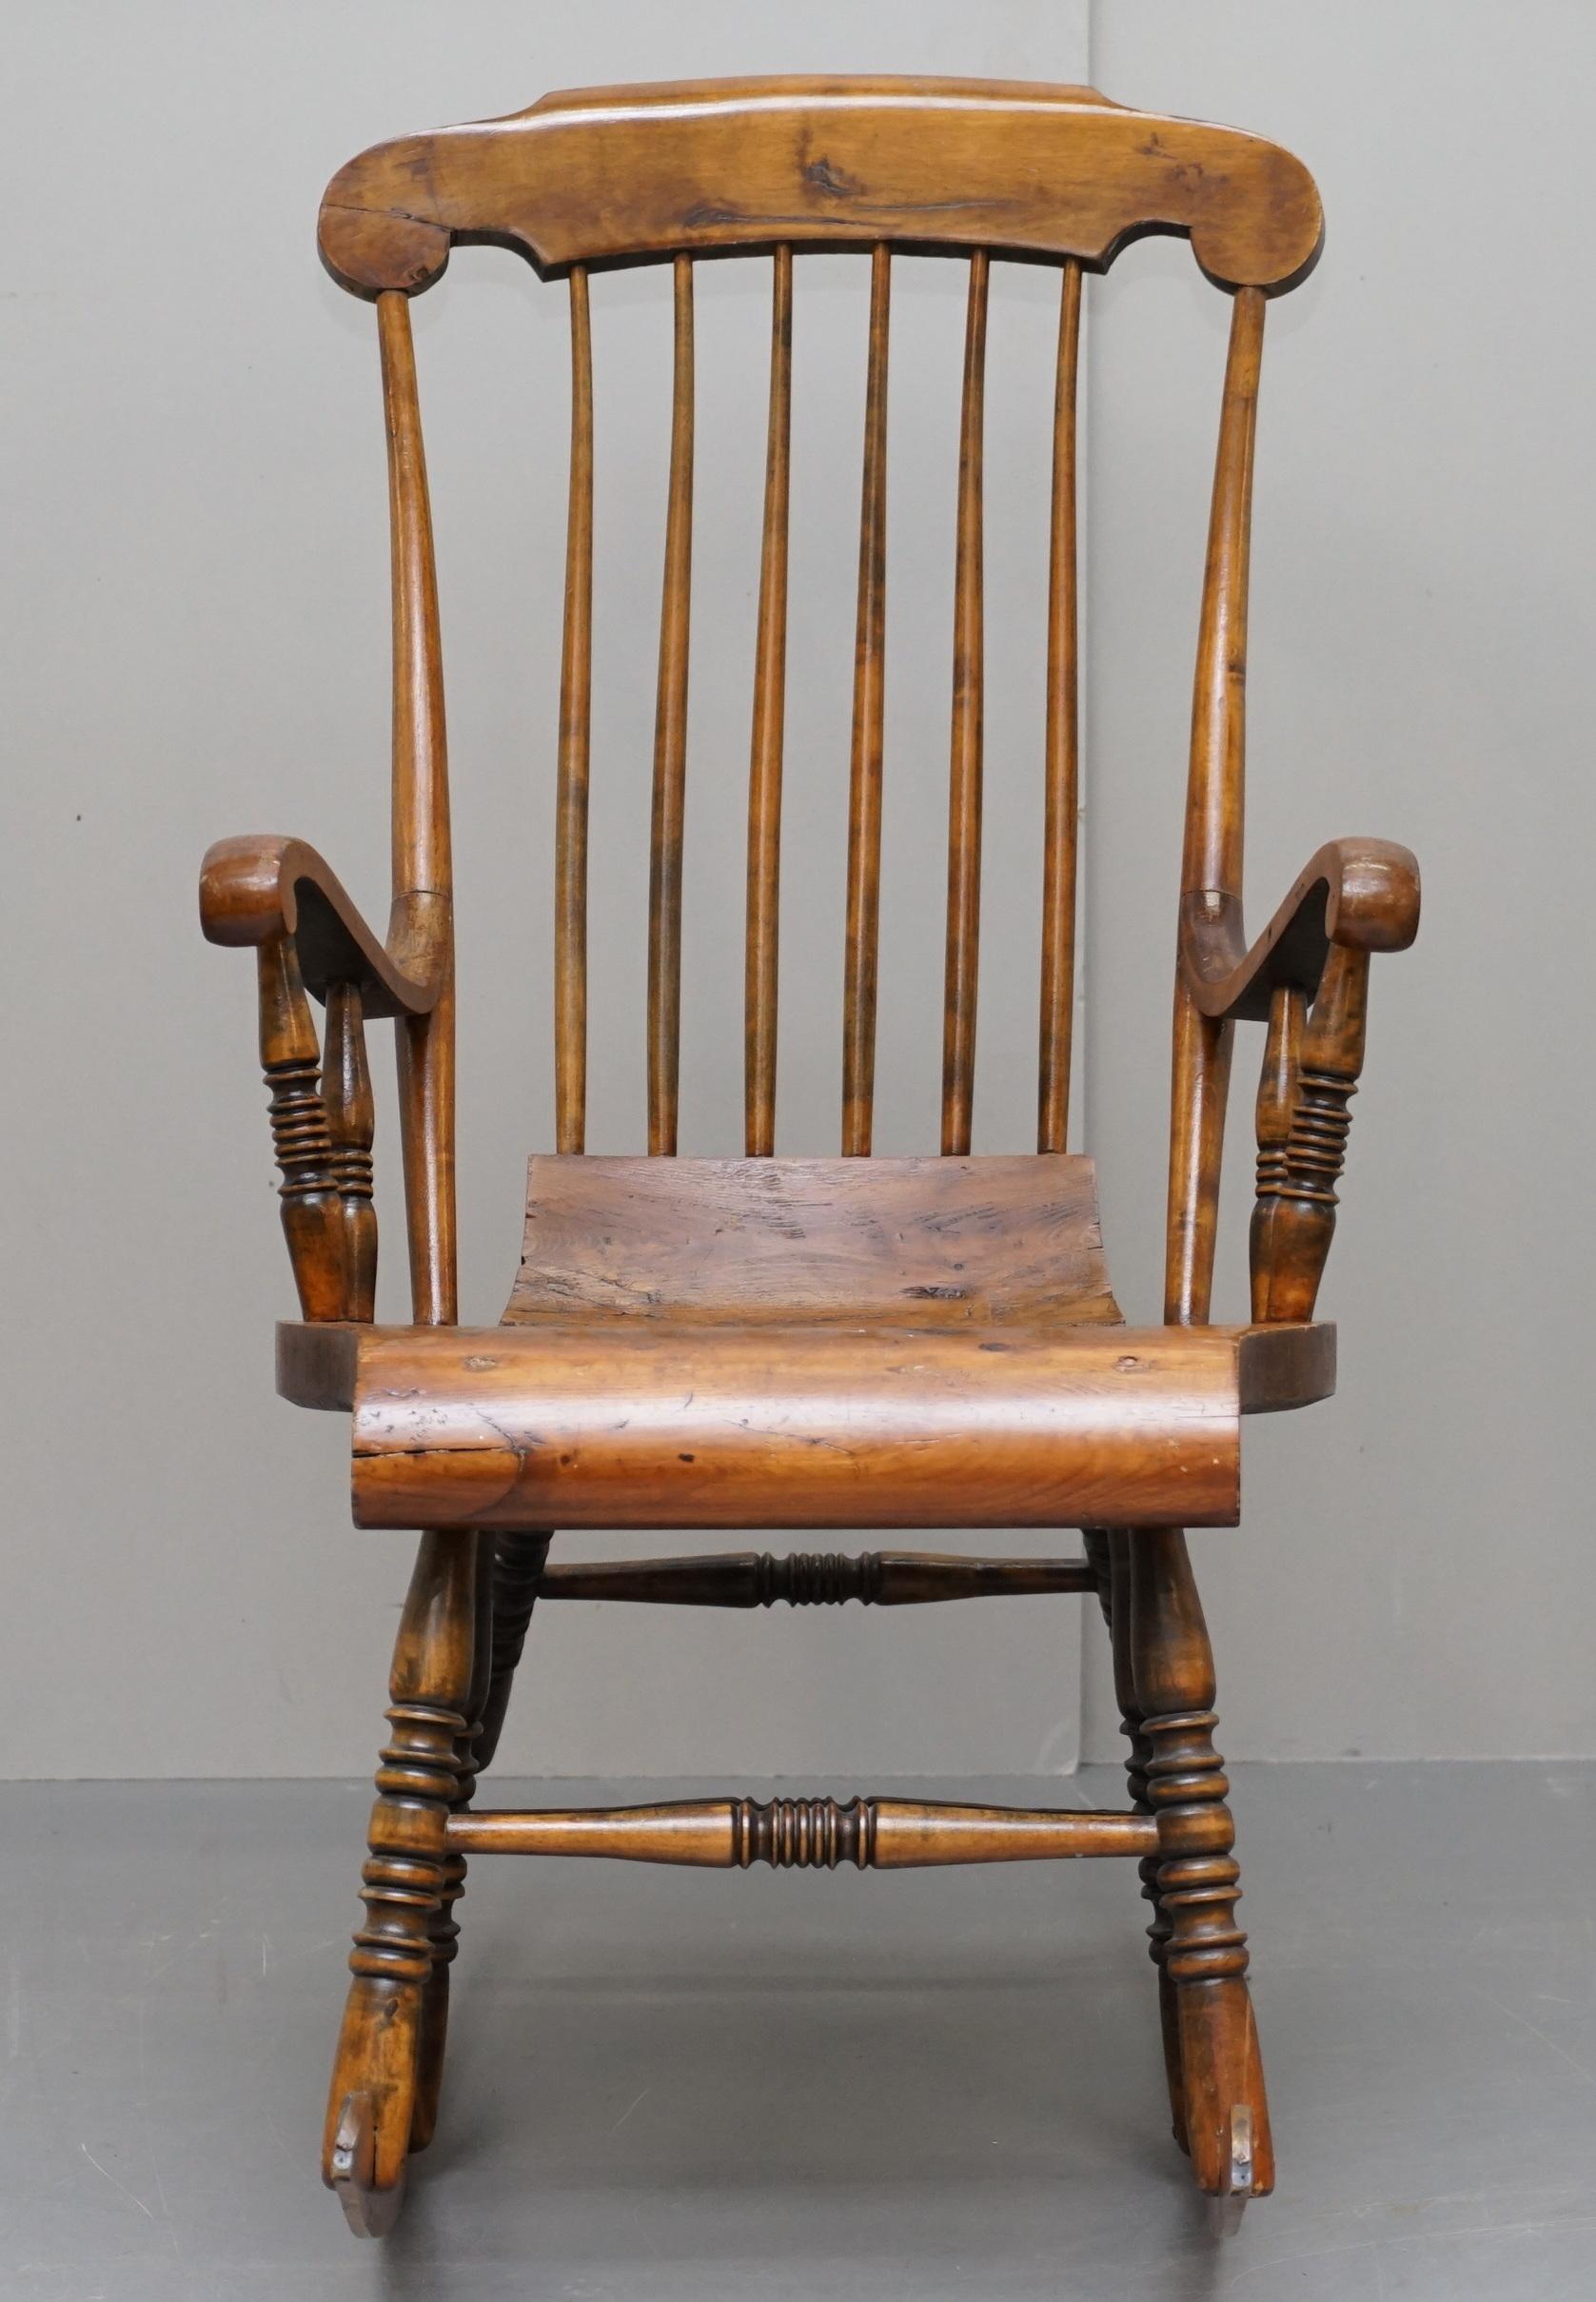 We are delighted to offer for sale this absolutely stunning William IV hand carved solid pine Swedish rocking armchair

This is a very ornate and decorative armchair, the timber is sculptured all over, the lines are so exaggerated compared to